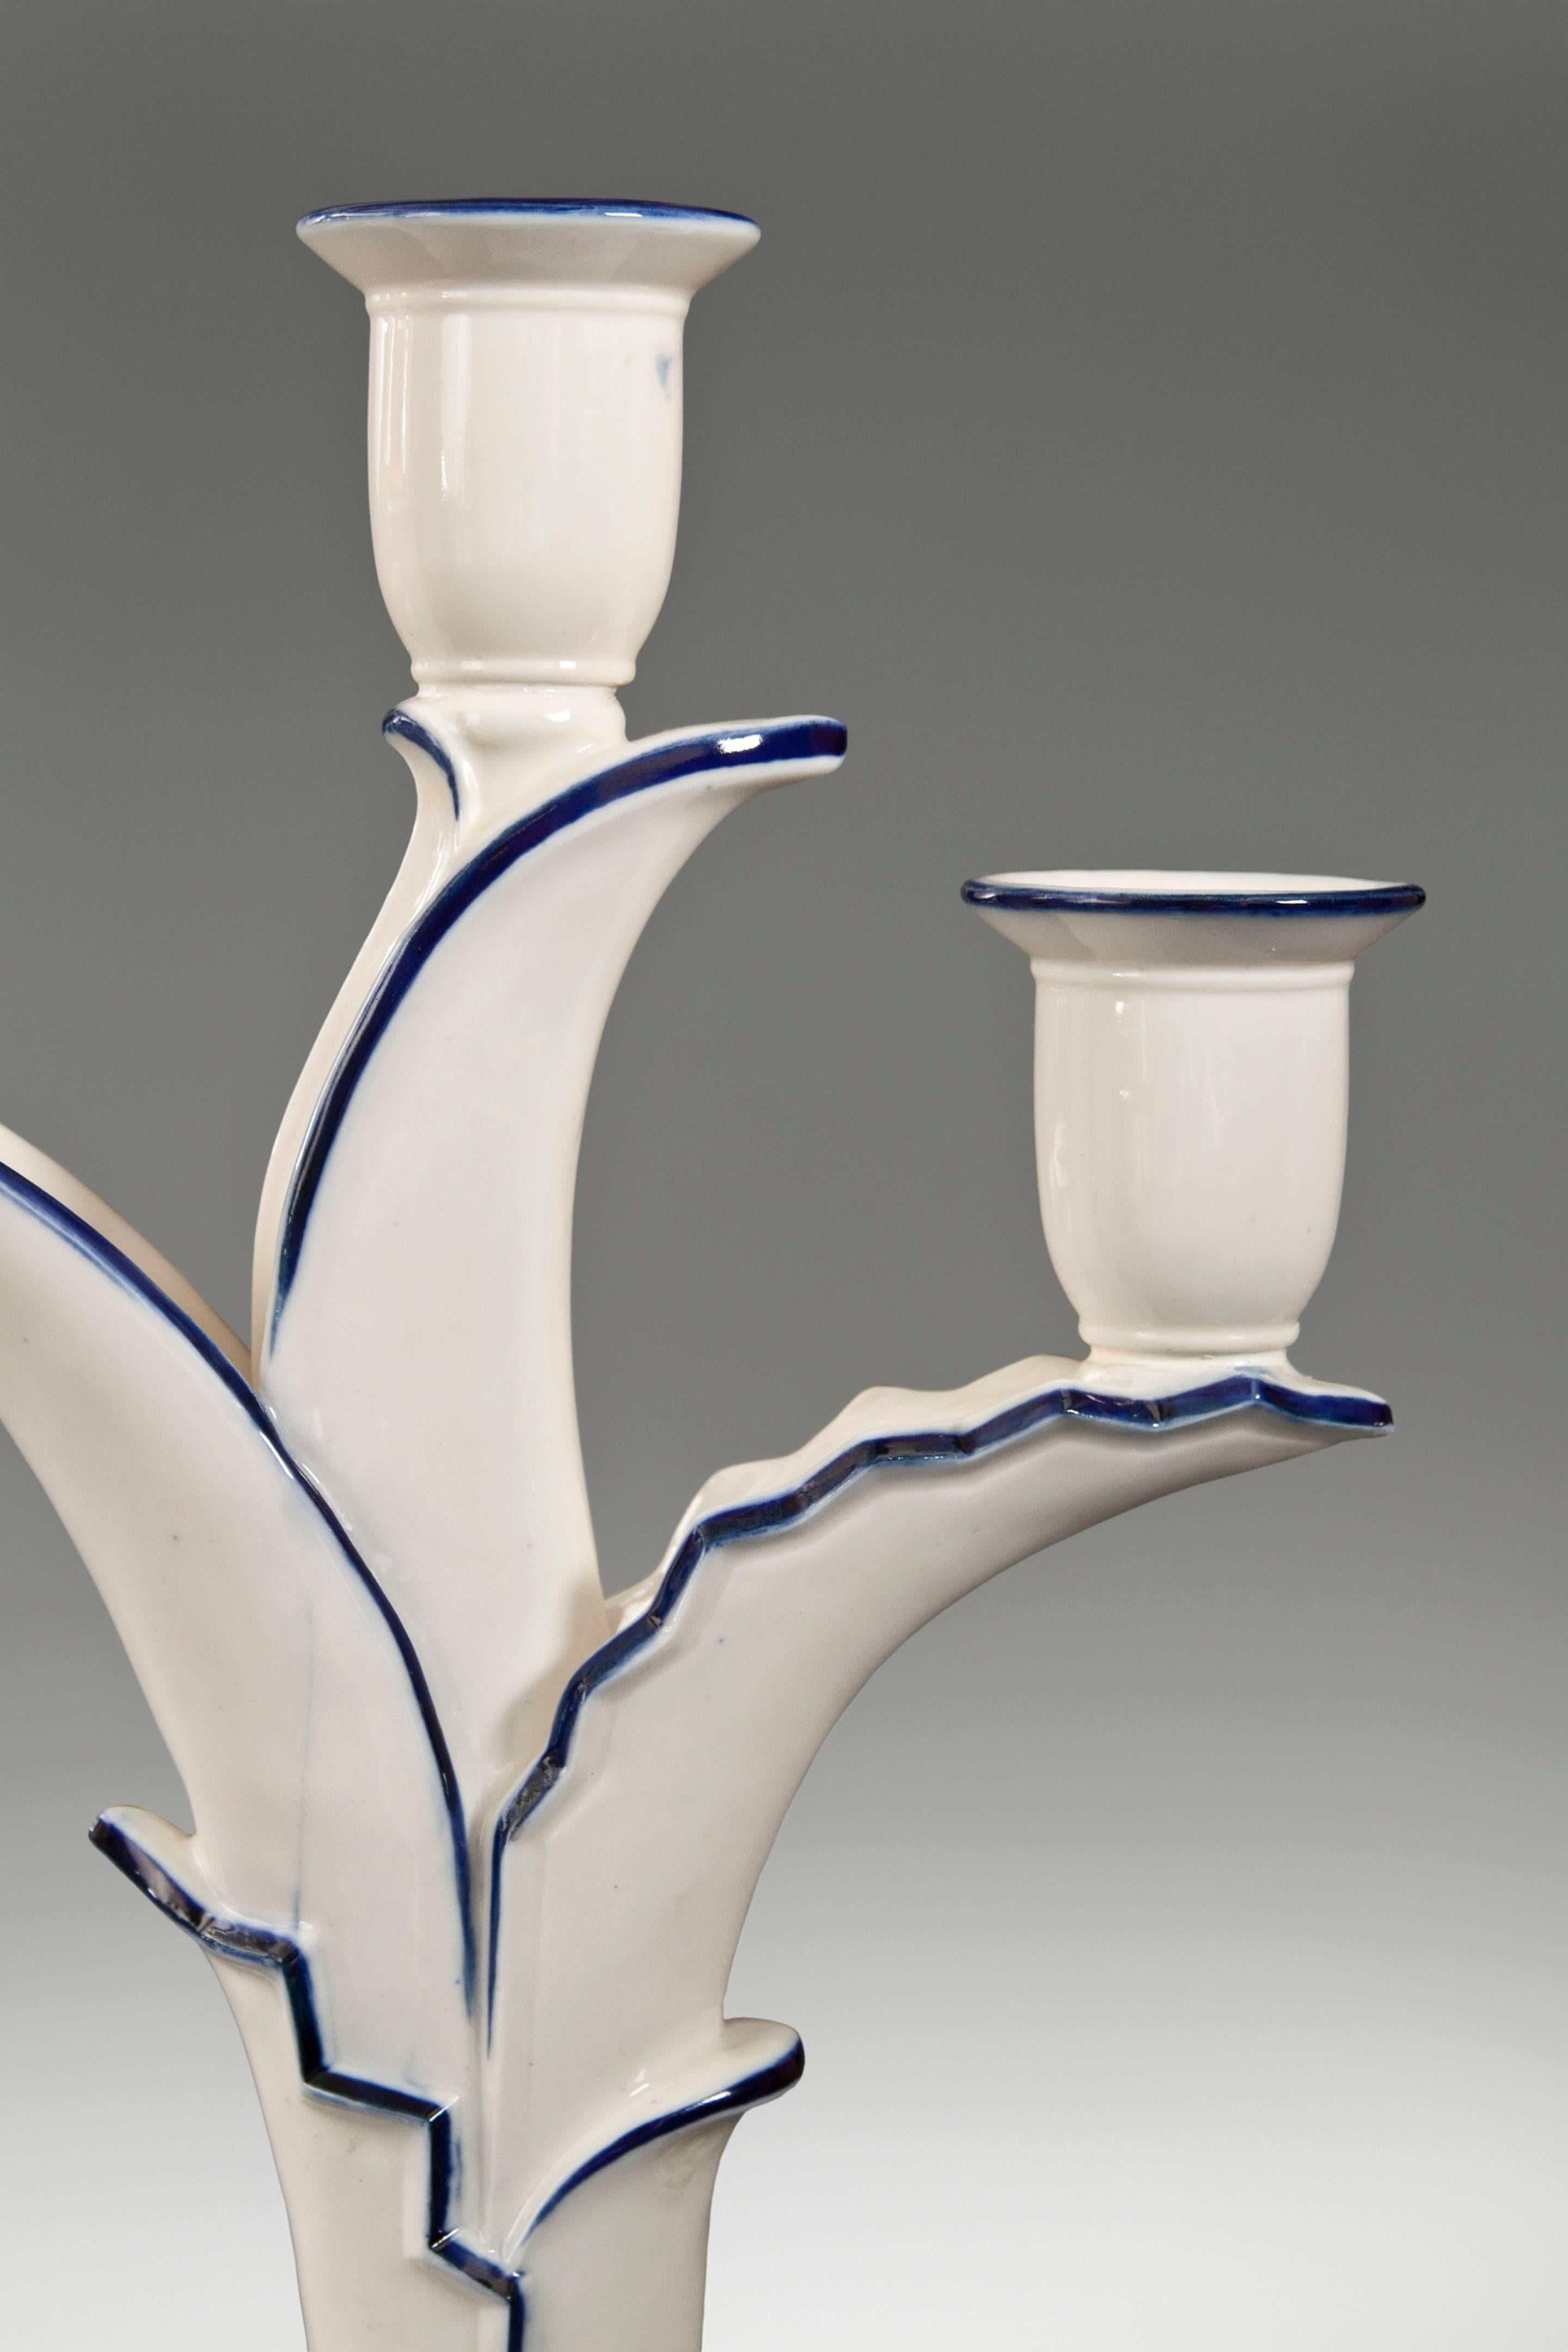 Schwarzburg Werkstätten, Pair of Cobalt & Ivory Glazed Porcelain Candelabra
Each in the form of a plant with unfurling leaves, issuing three candle holders, on a molded oval base with two stylized bracket feet.  Minor restorations, overall excellent